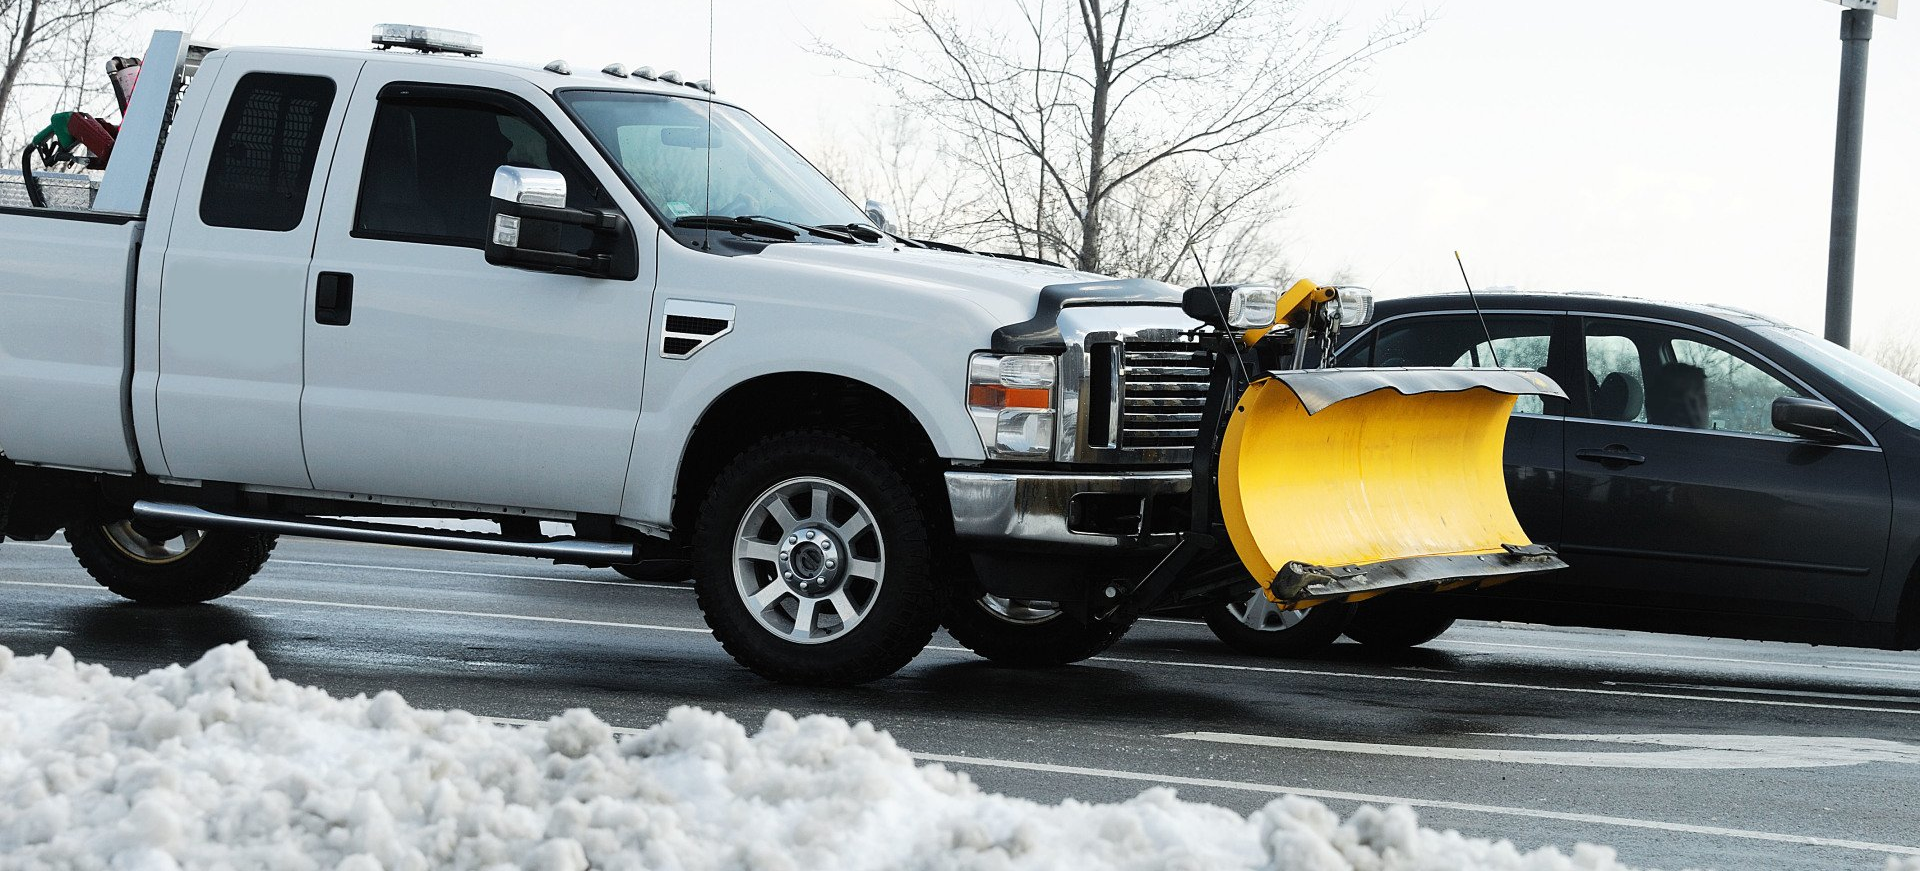 Commercial snow plowing